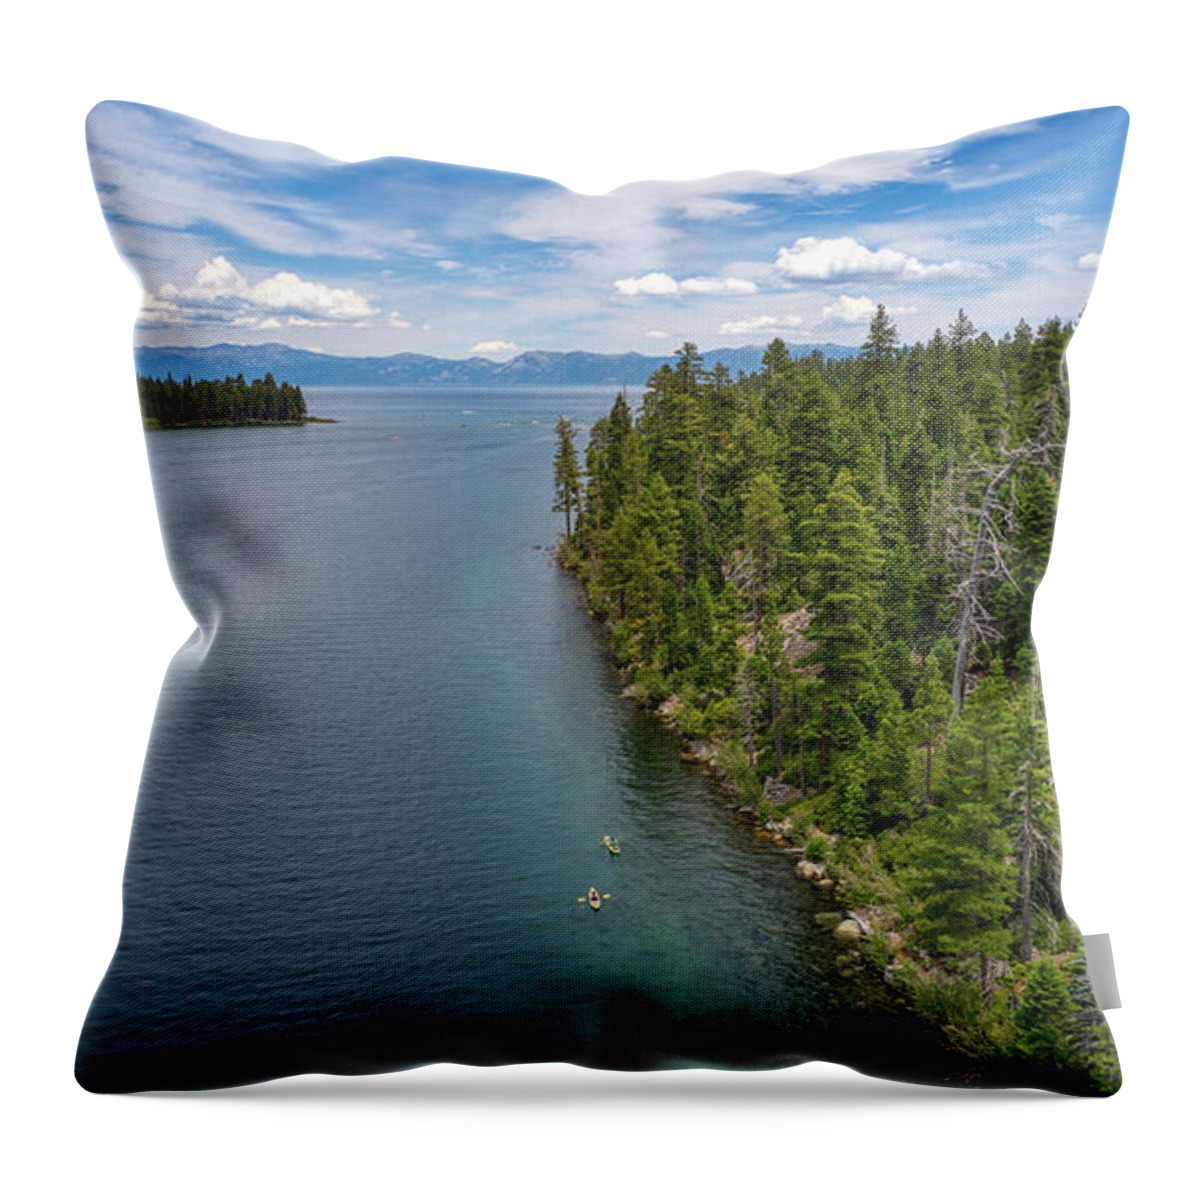 Lake Tahoe Throw Pillow featuring the photograph Emerald Bay Lake Tahoe by Anthony Giammarino